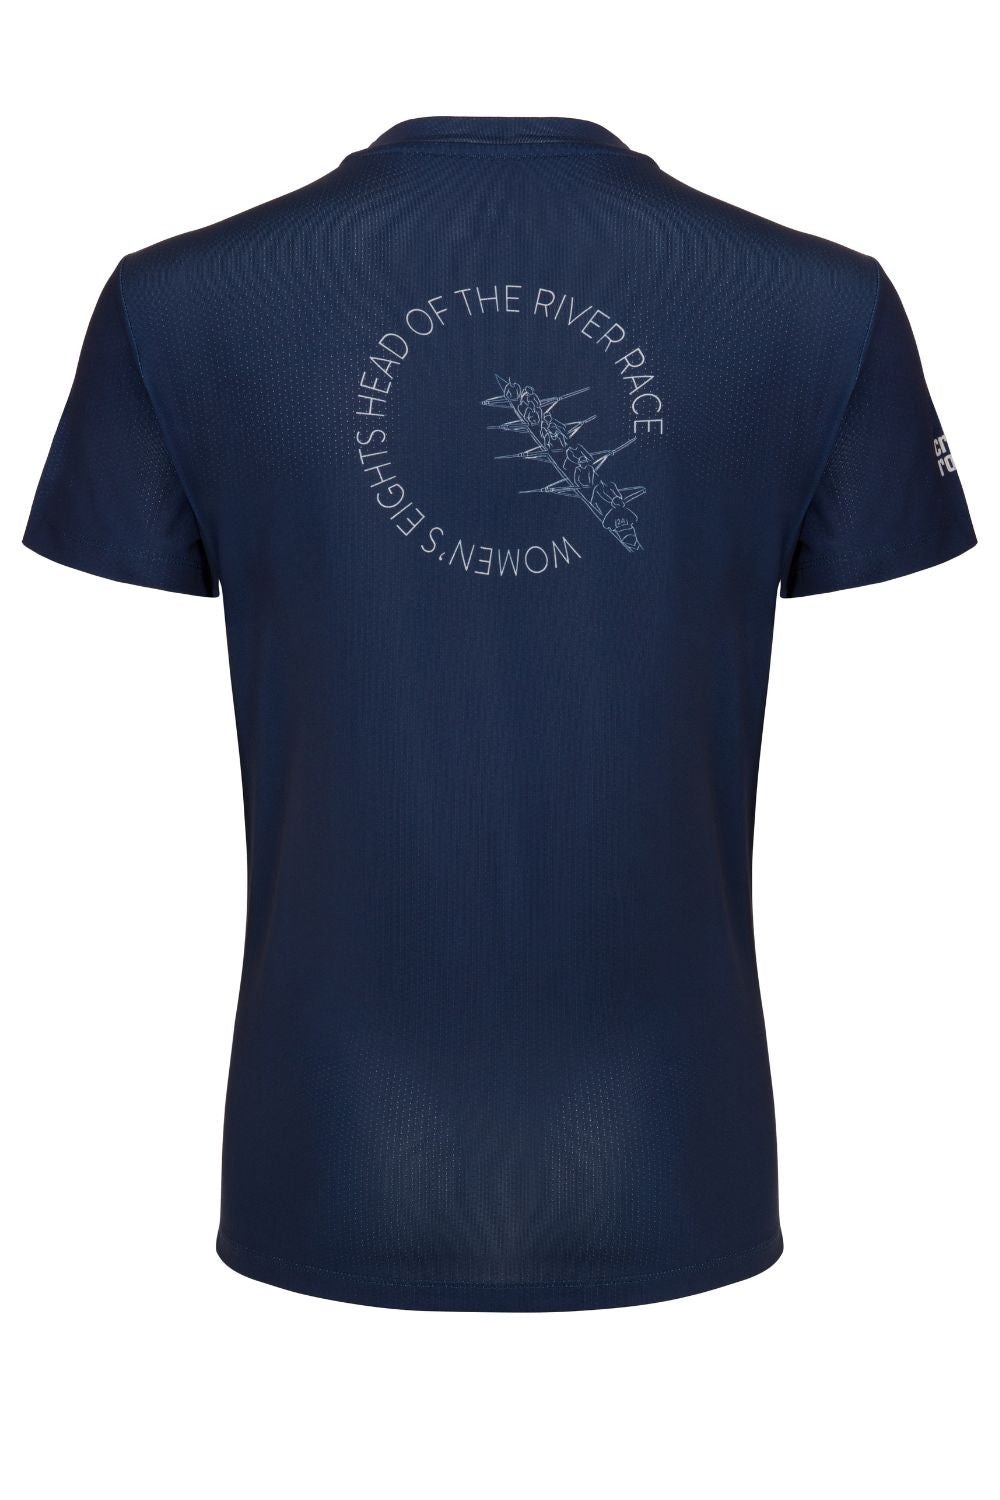 The WEHORR Carbonised Bamboo Tee (Women's)